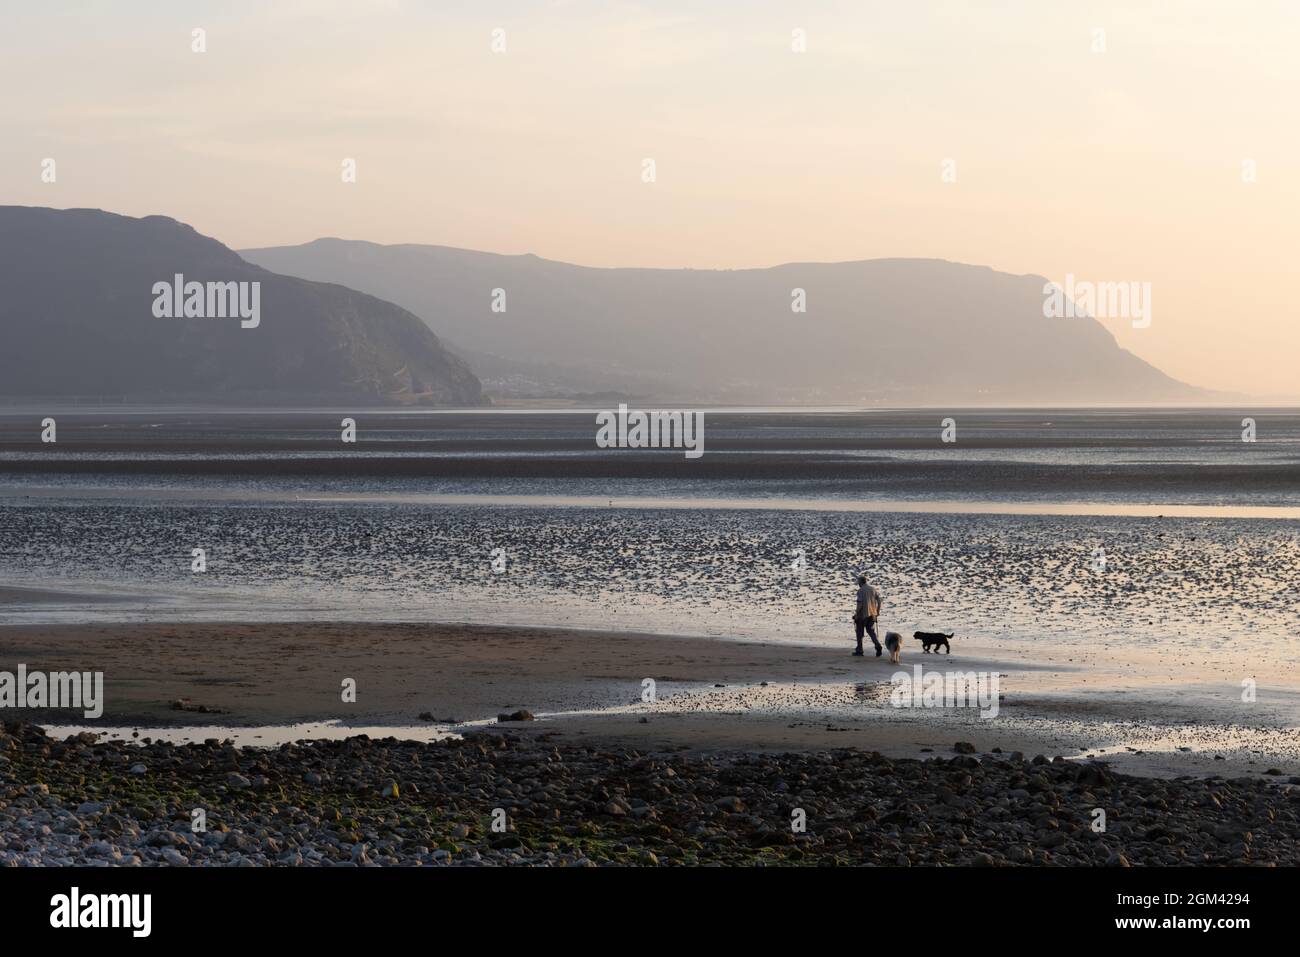 Llandudno, Conwy, UK, September 7th 2021: In the evening near sunset a man walks two dogs whilst the tide is out on a deserted West Shore beach. Stock Photo